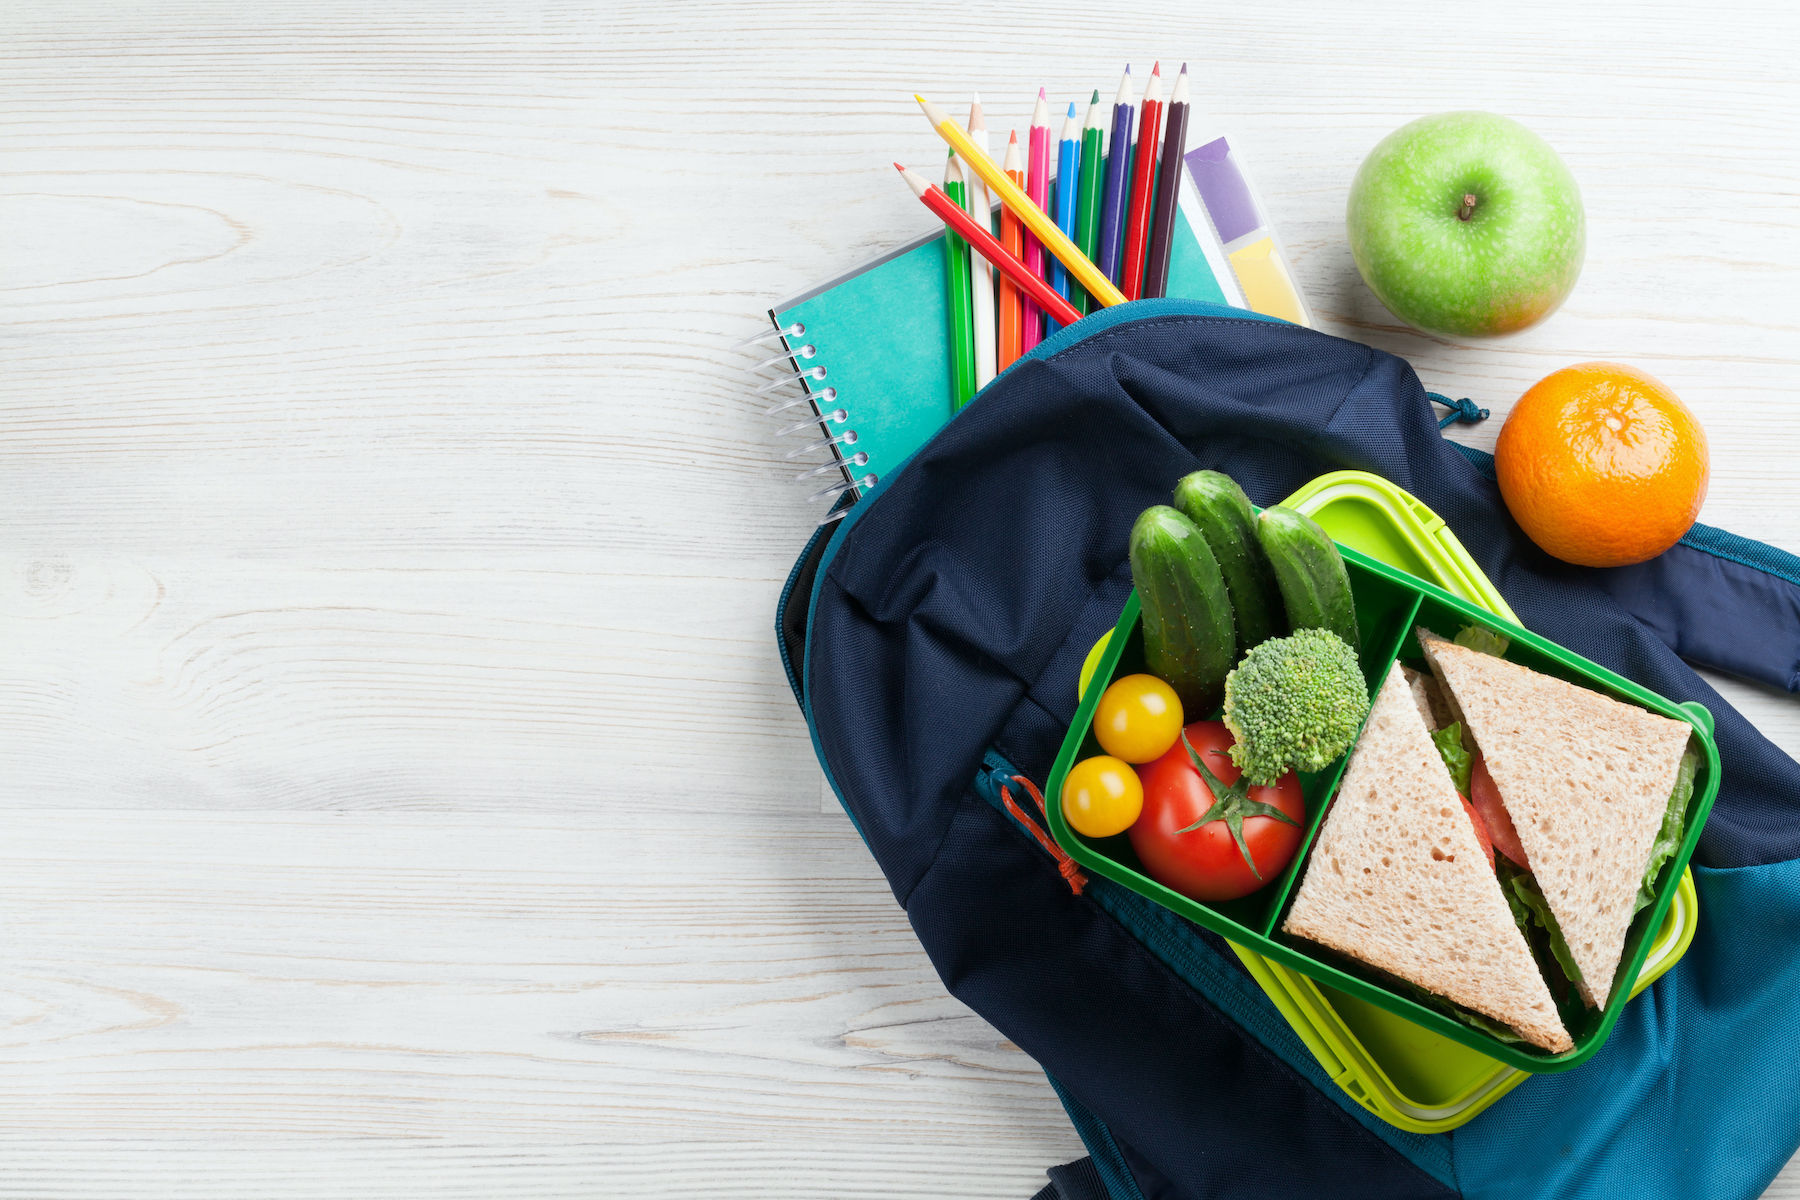 Backpack with school supplies and lunch